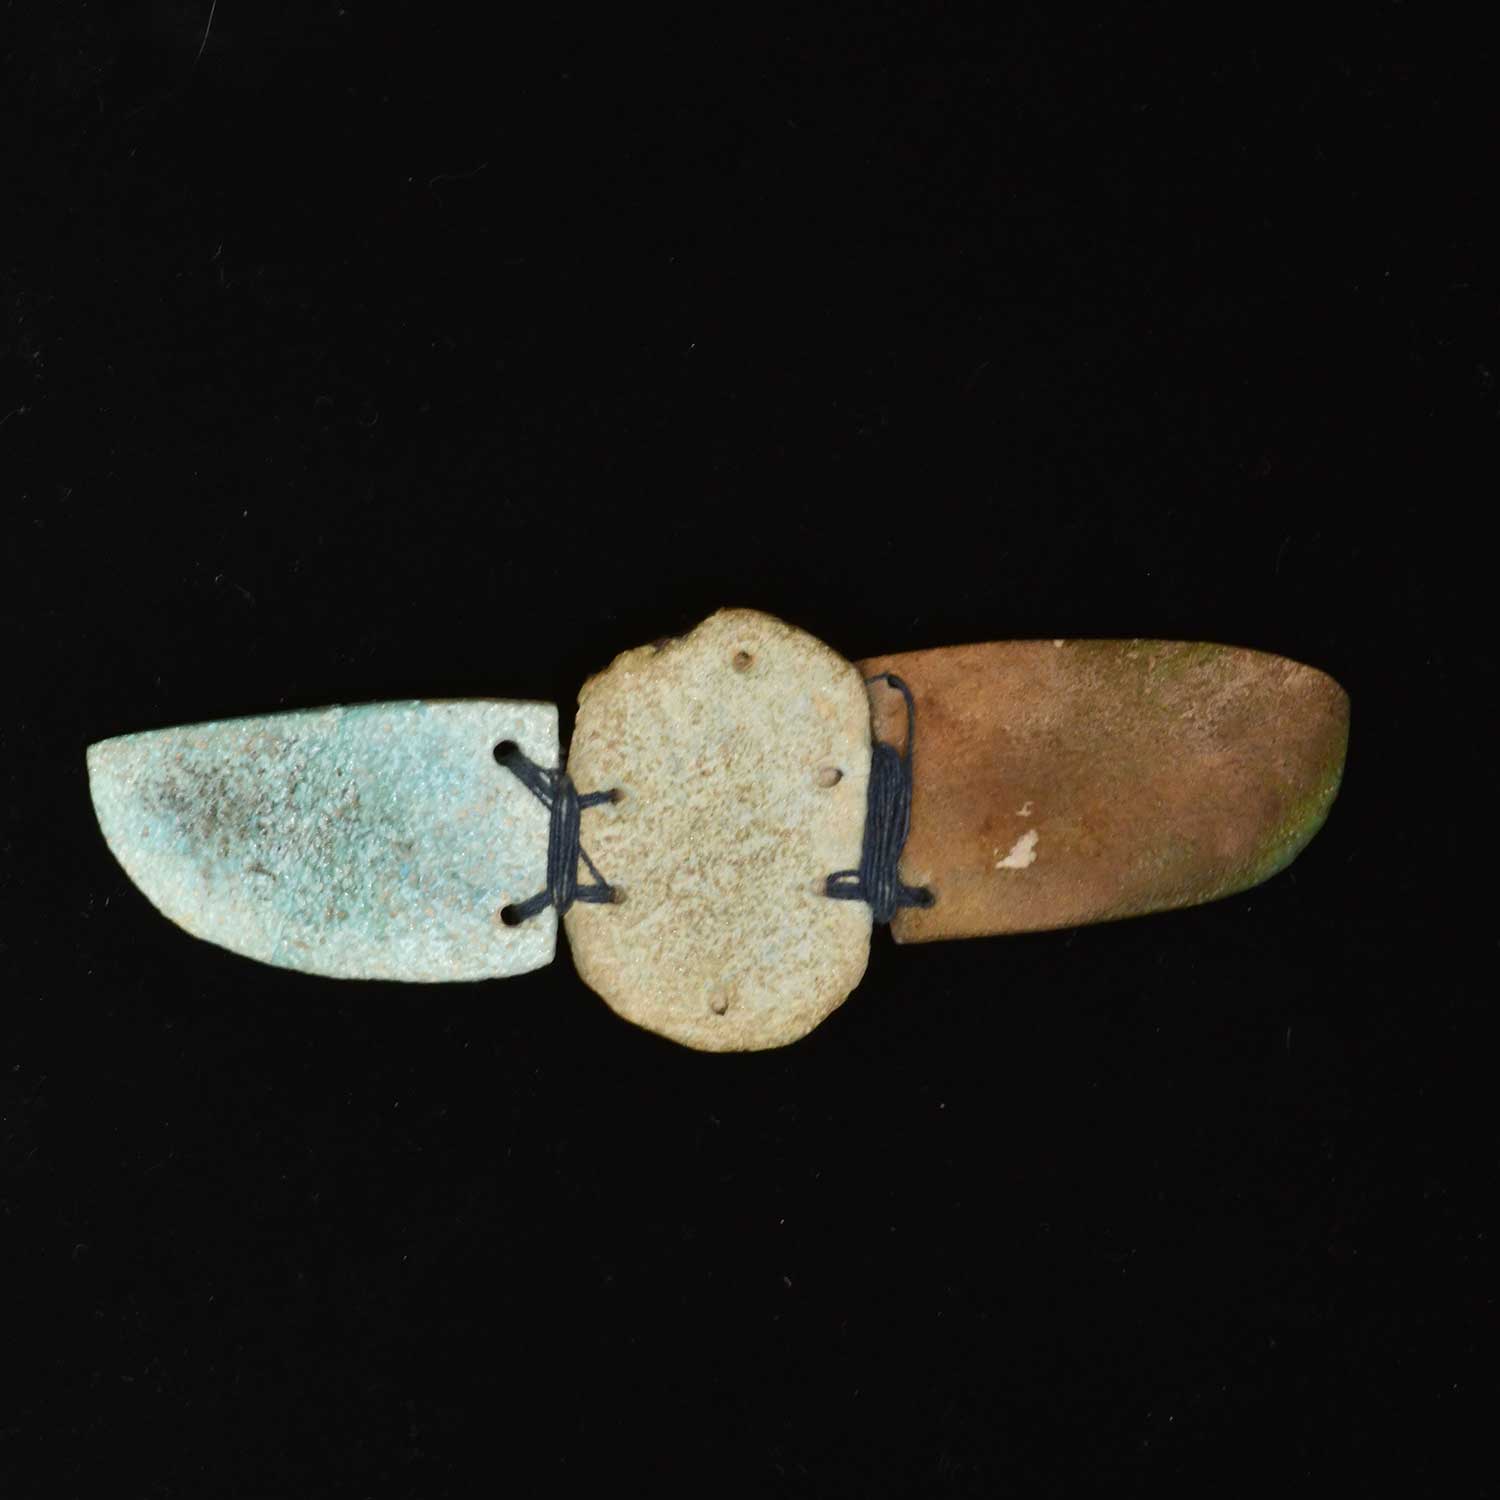 An Egyptian Faience Winged Scarab, Late Period ca. 664-332 BCE